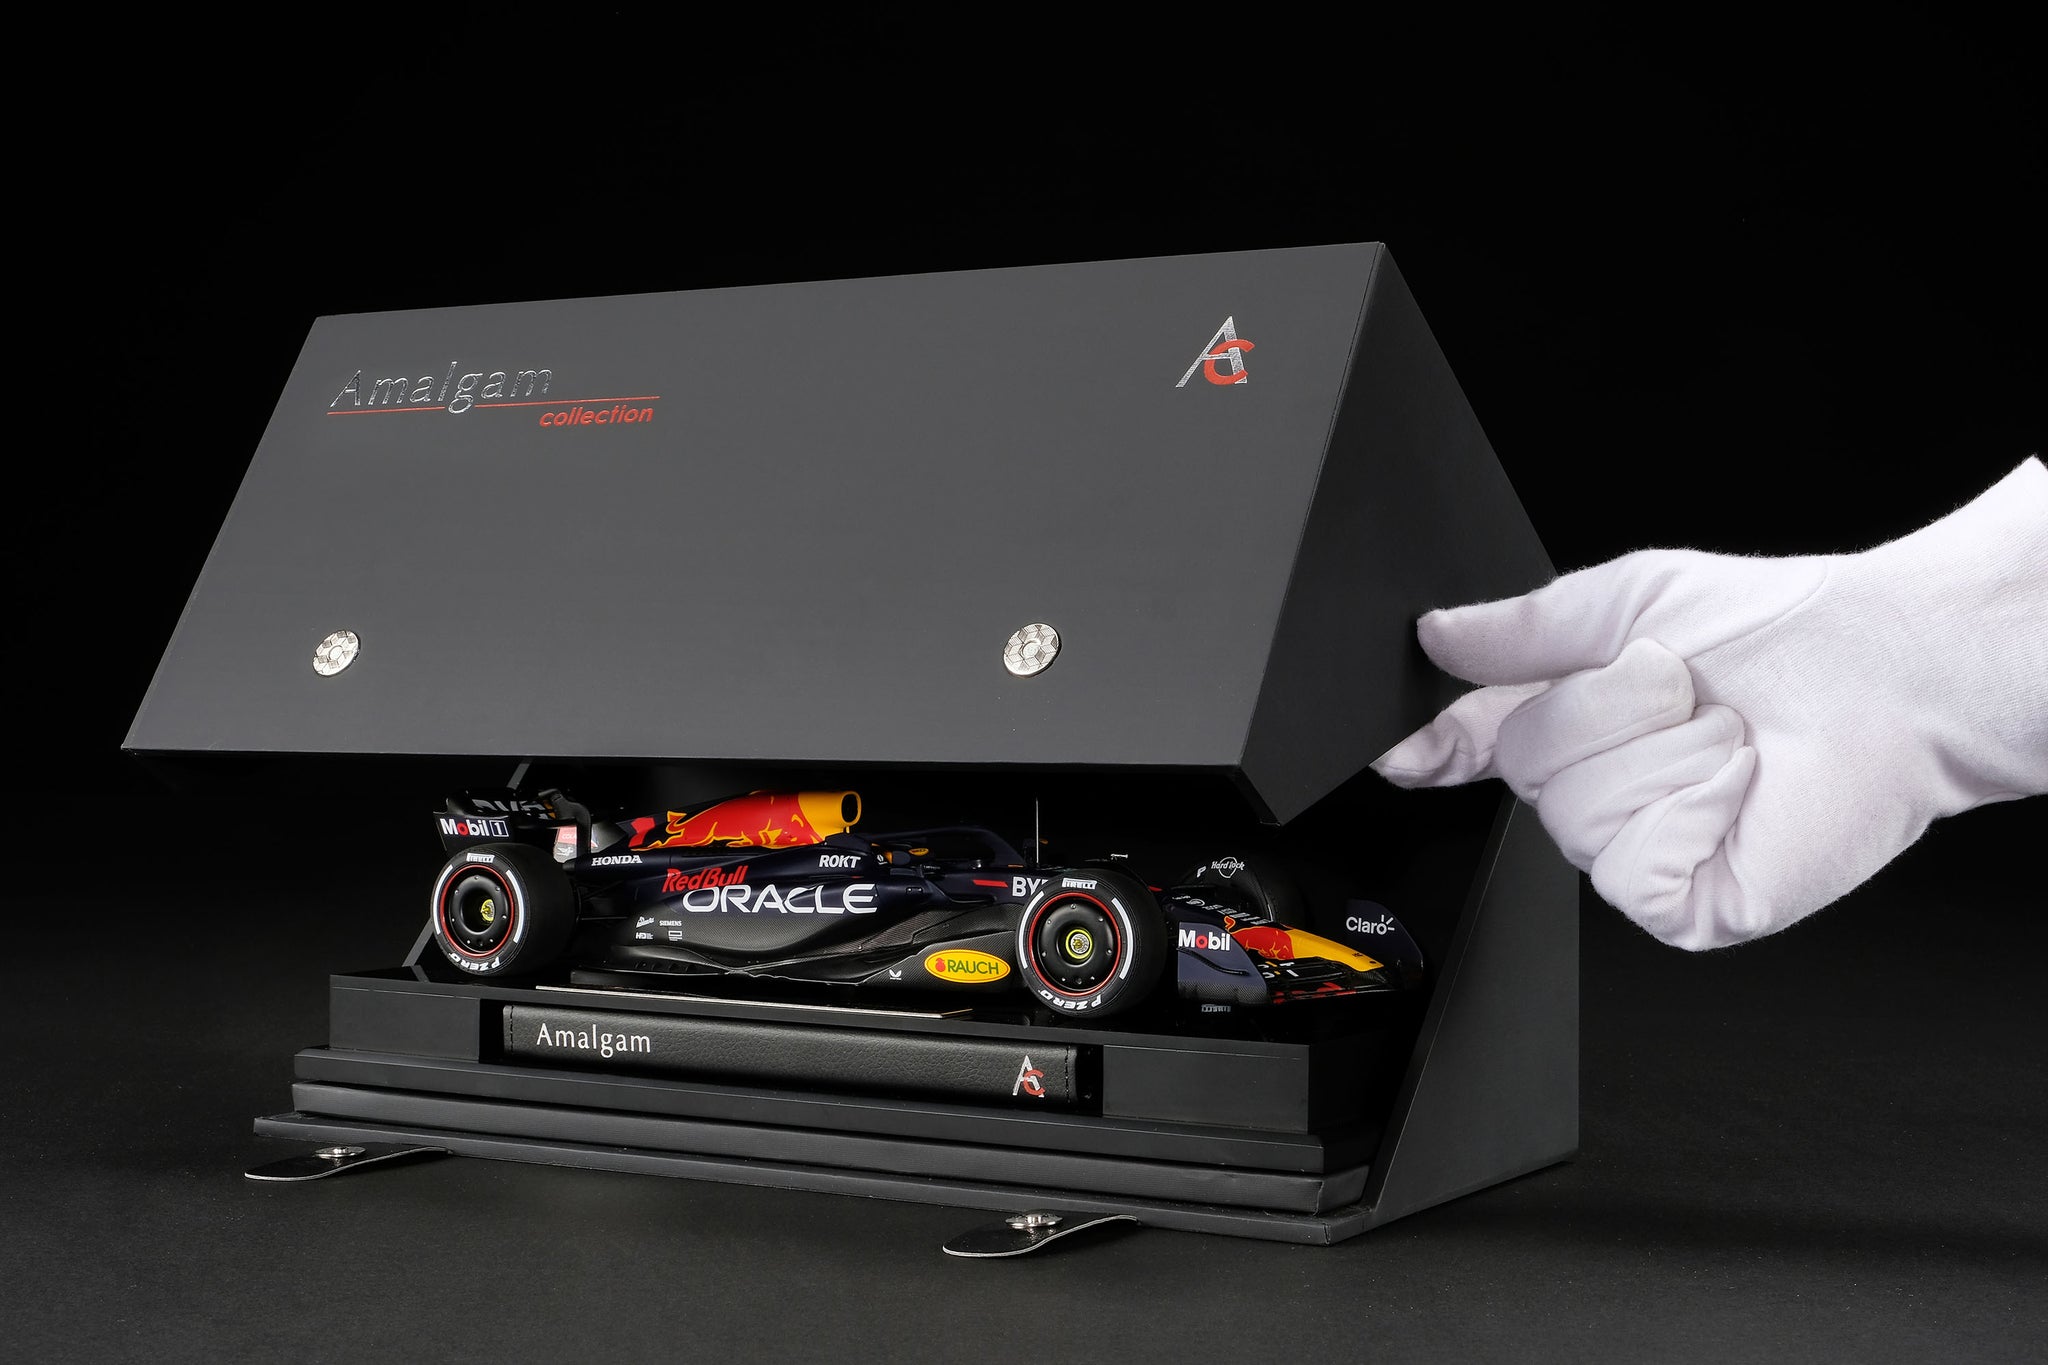 RB19 at 1:18 scale